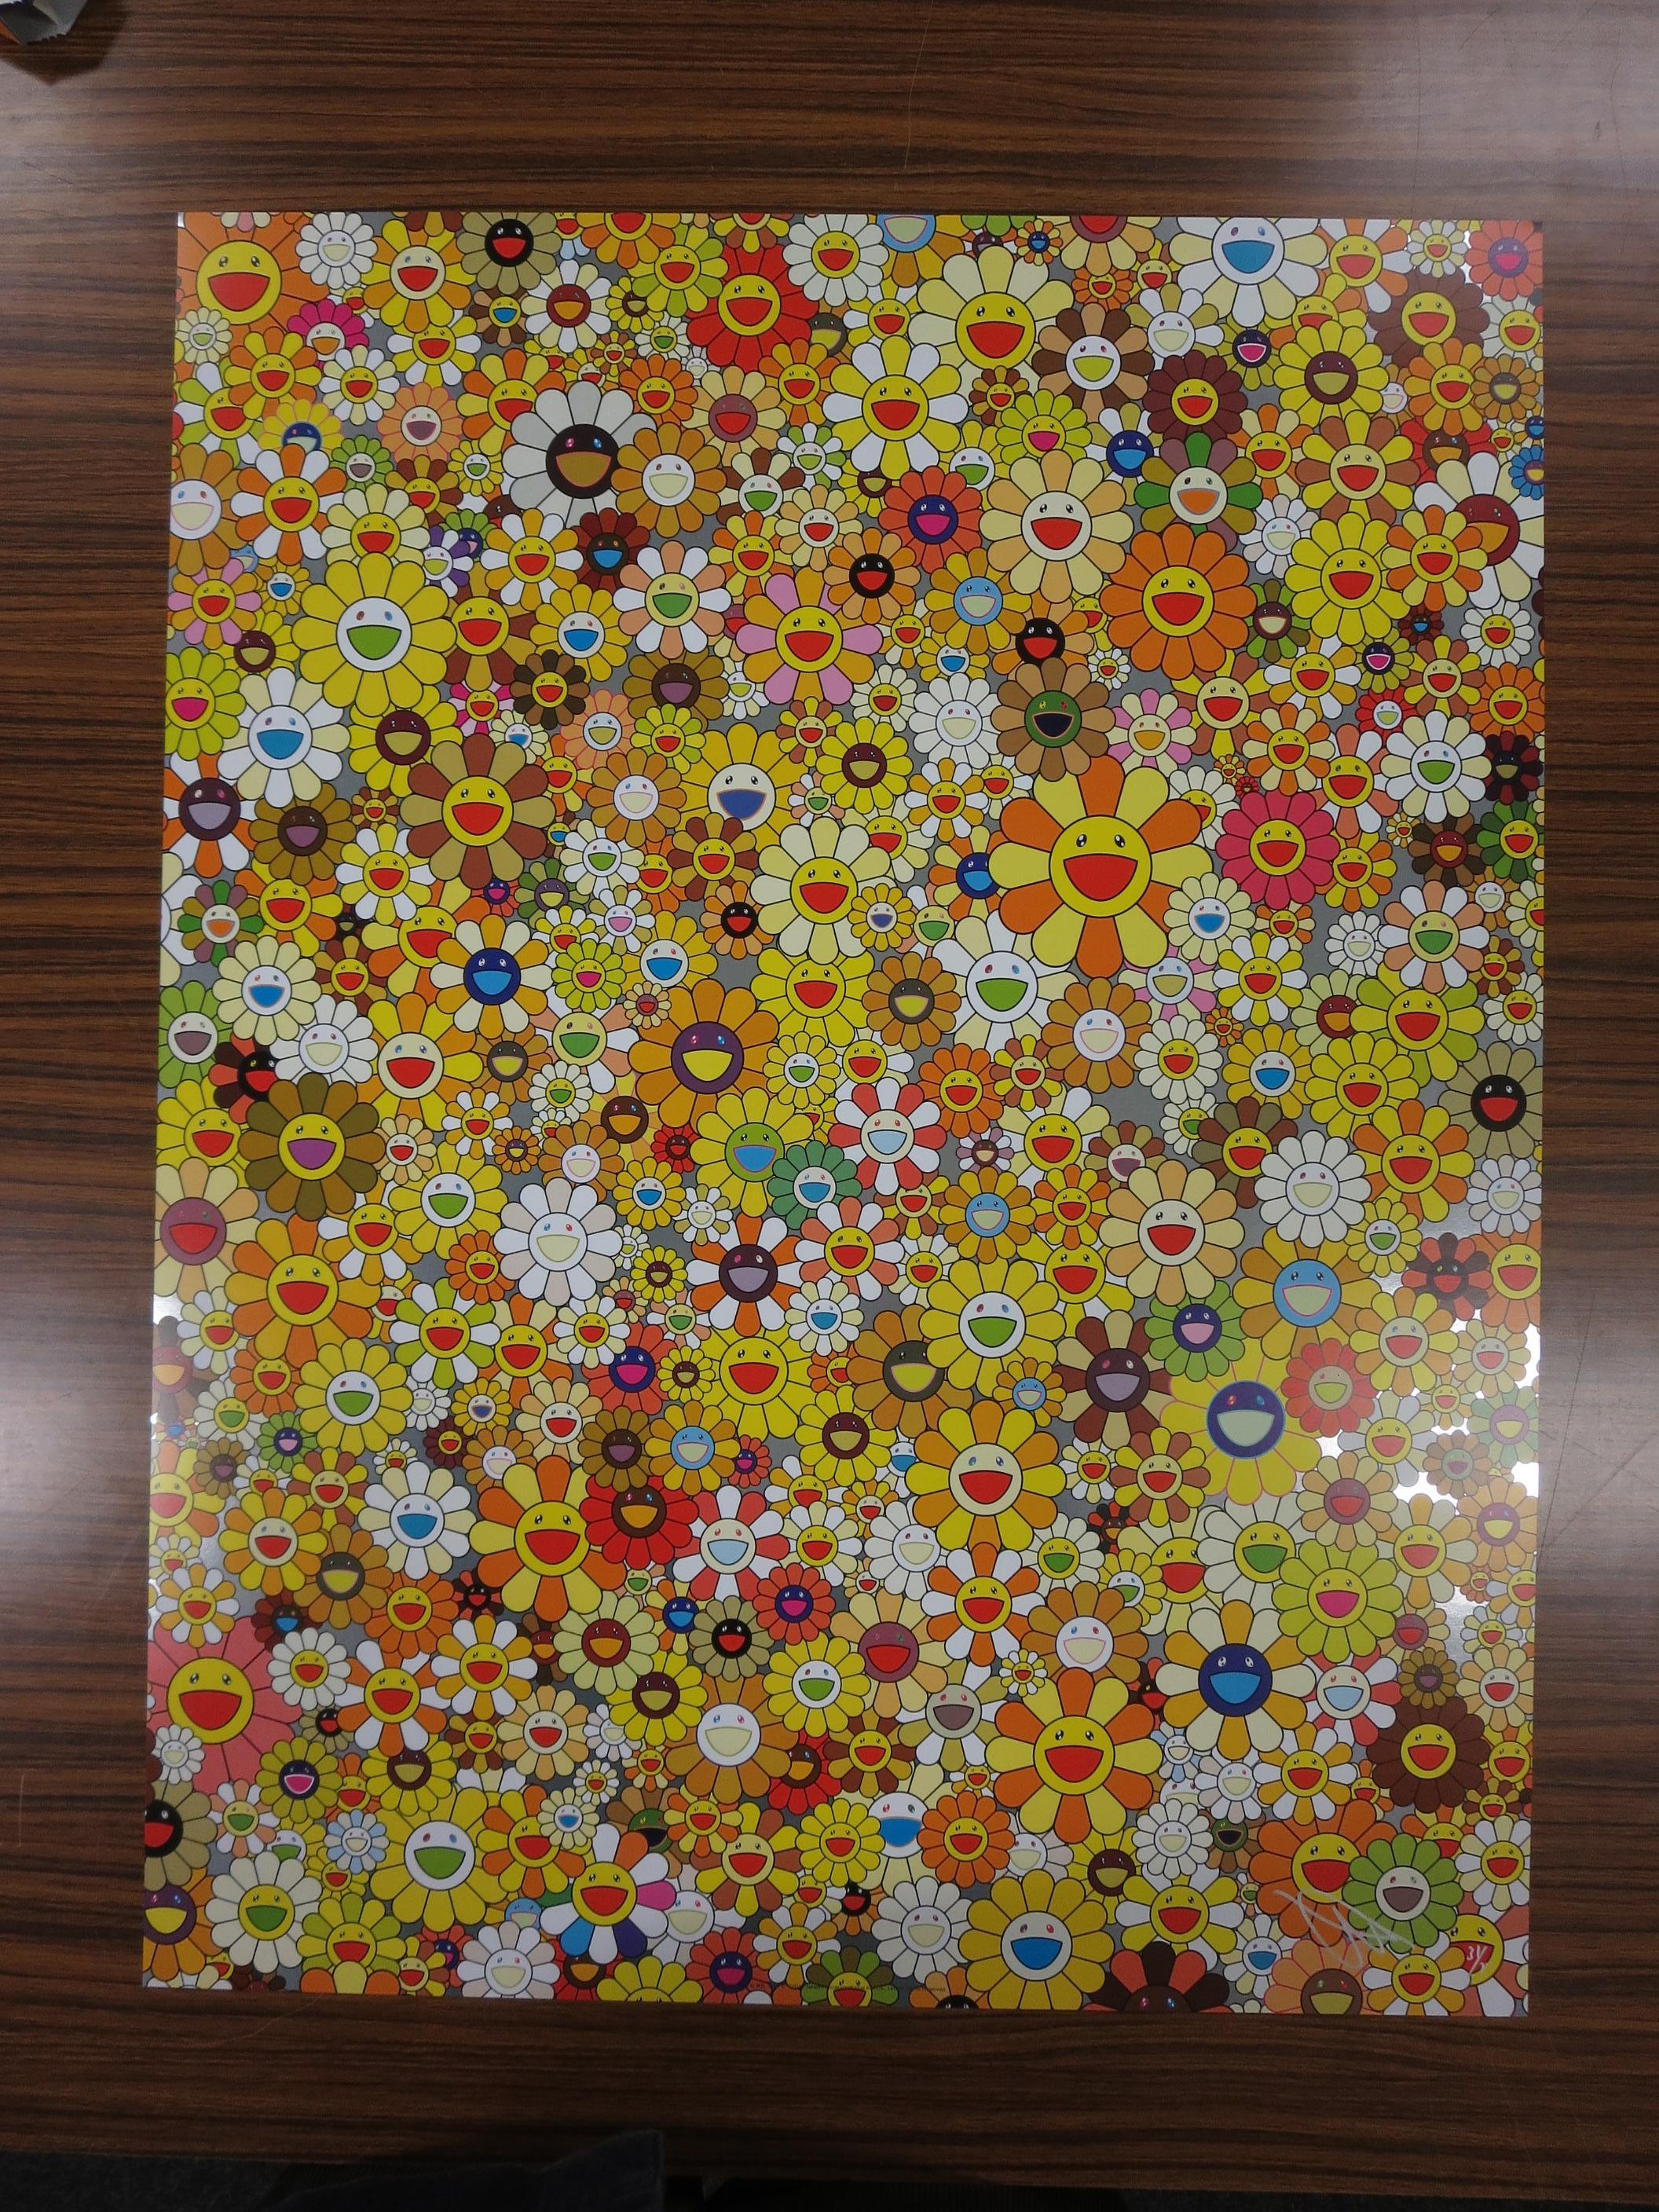 An Homage to IKB, 1957E, 2012 by Takashi Murakami
Offset print, numbered and signed by the artist
27 1/10 × 20 9/10 in
68. × 53 cm
Edition  31/300
The present work comes in a brand new wooden frame

Takashi Murakami is best known for his